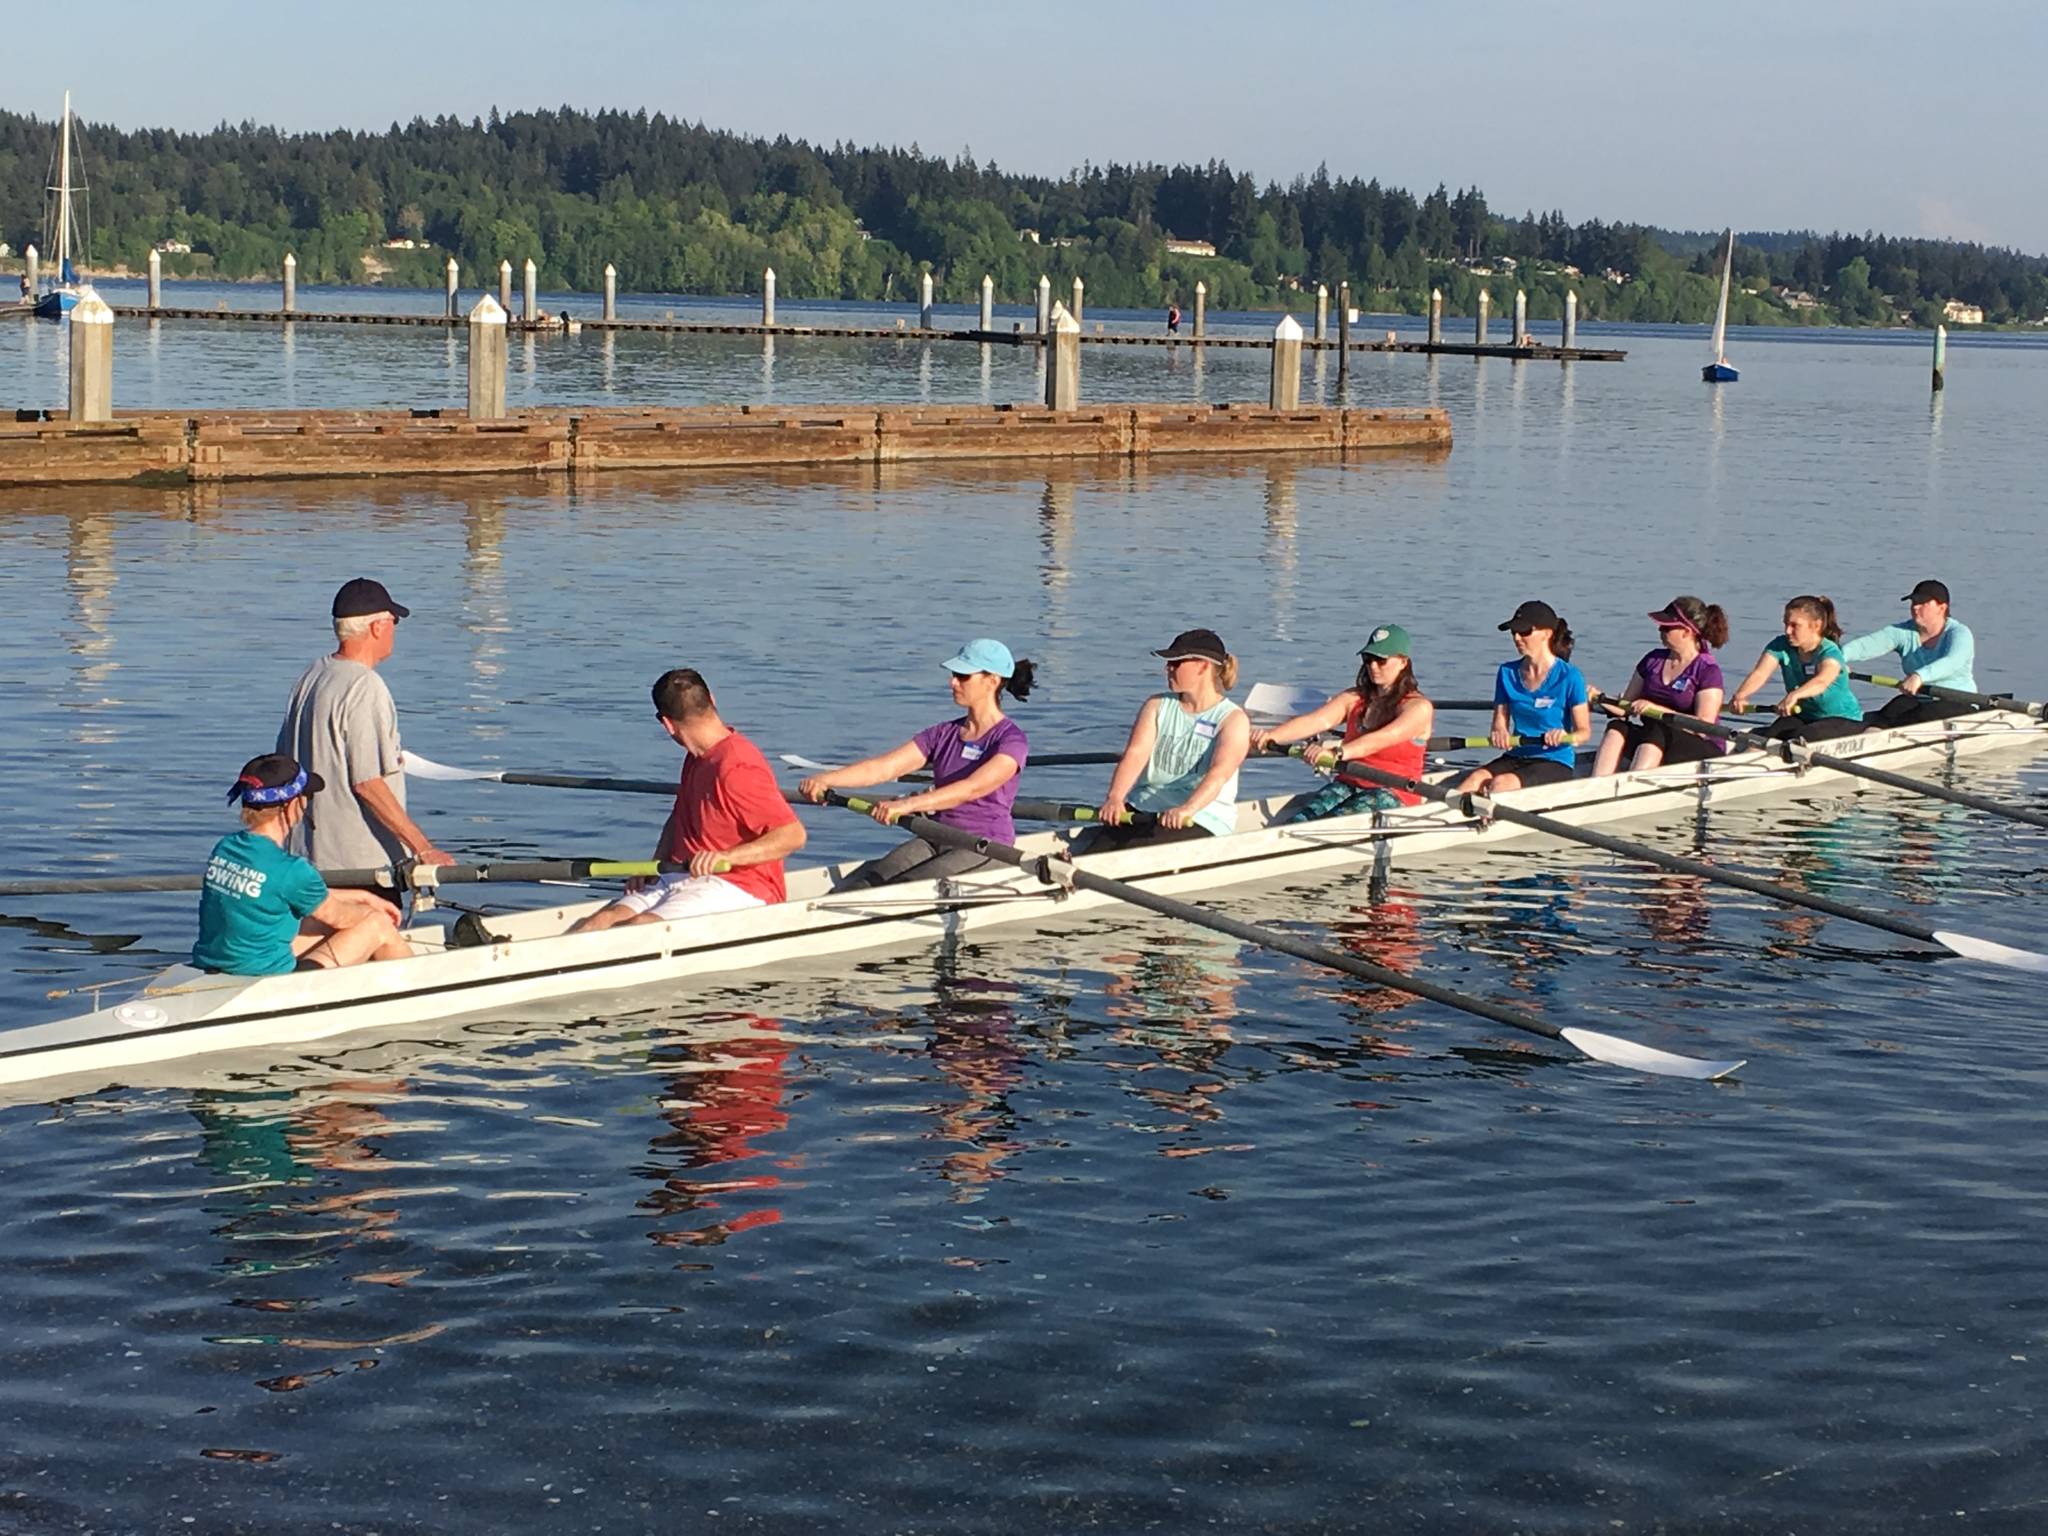 Water sports bring economic boost to Kitsap County